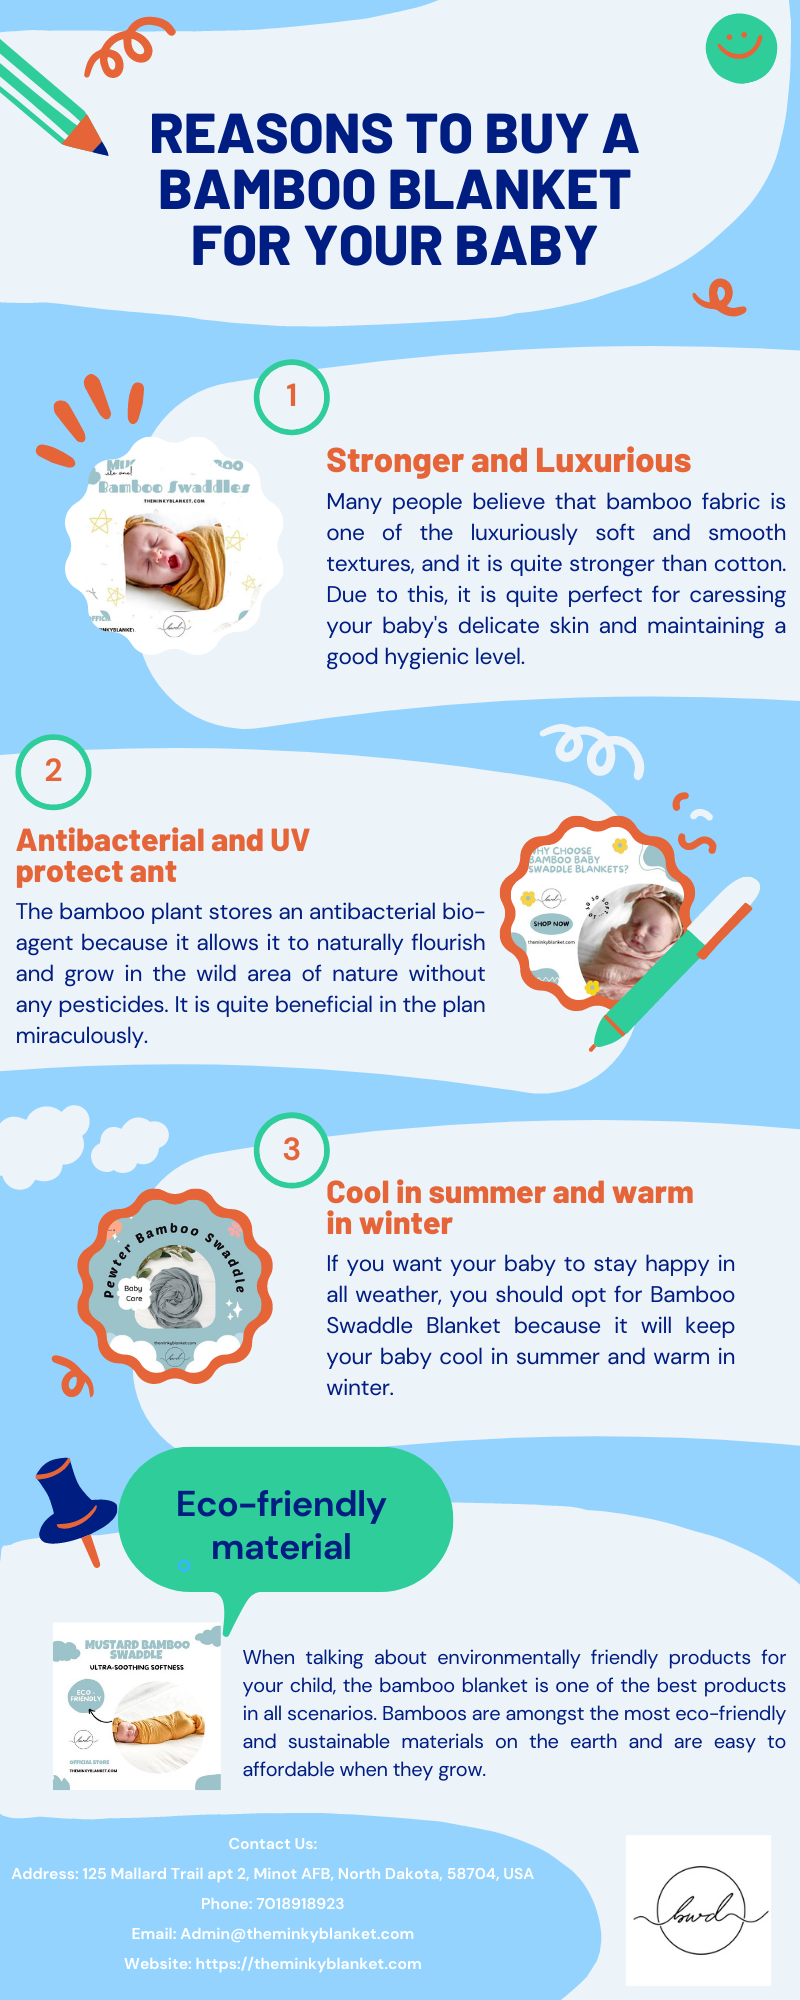 Reasons to buy a bamboo blanket for your baby - Gifyu